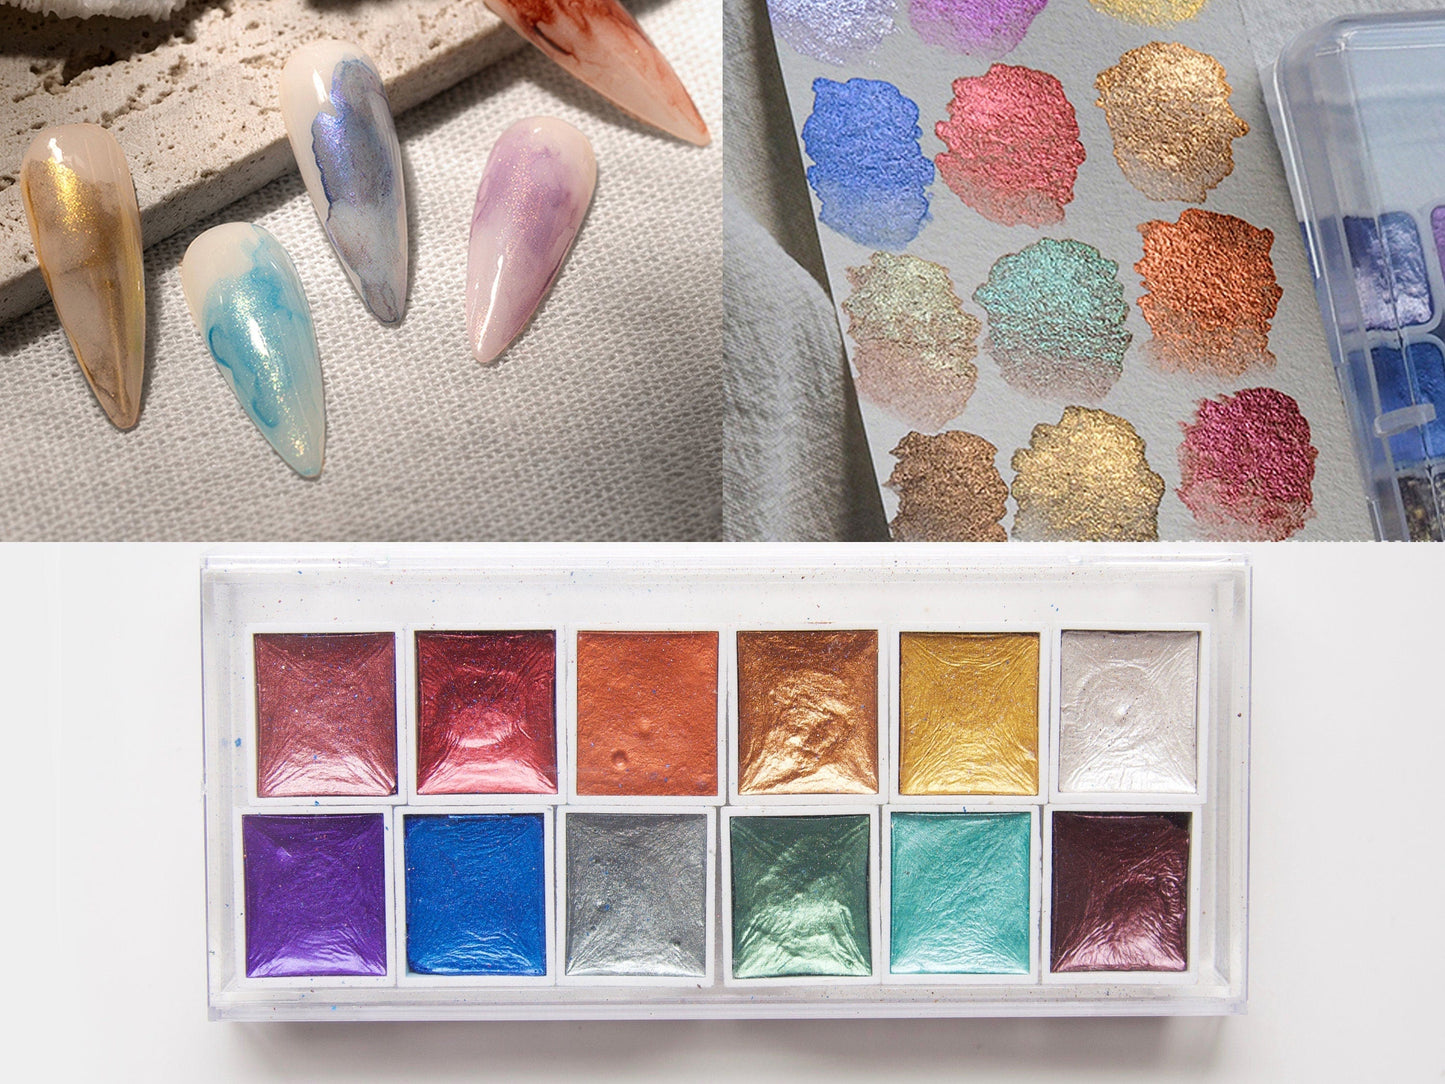 Glitter Metallic Watercolor Set-12 Assorted Colors Universe Starry Pearl Glittery Air Dry Water Color Solid Pigment Paint Shiny Aquarelle